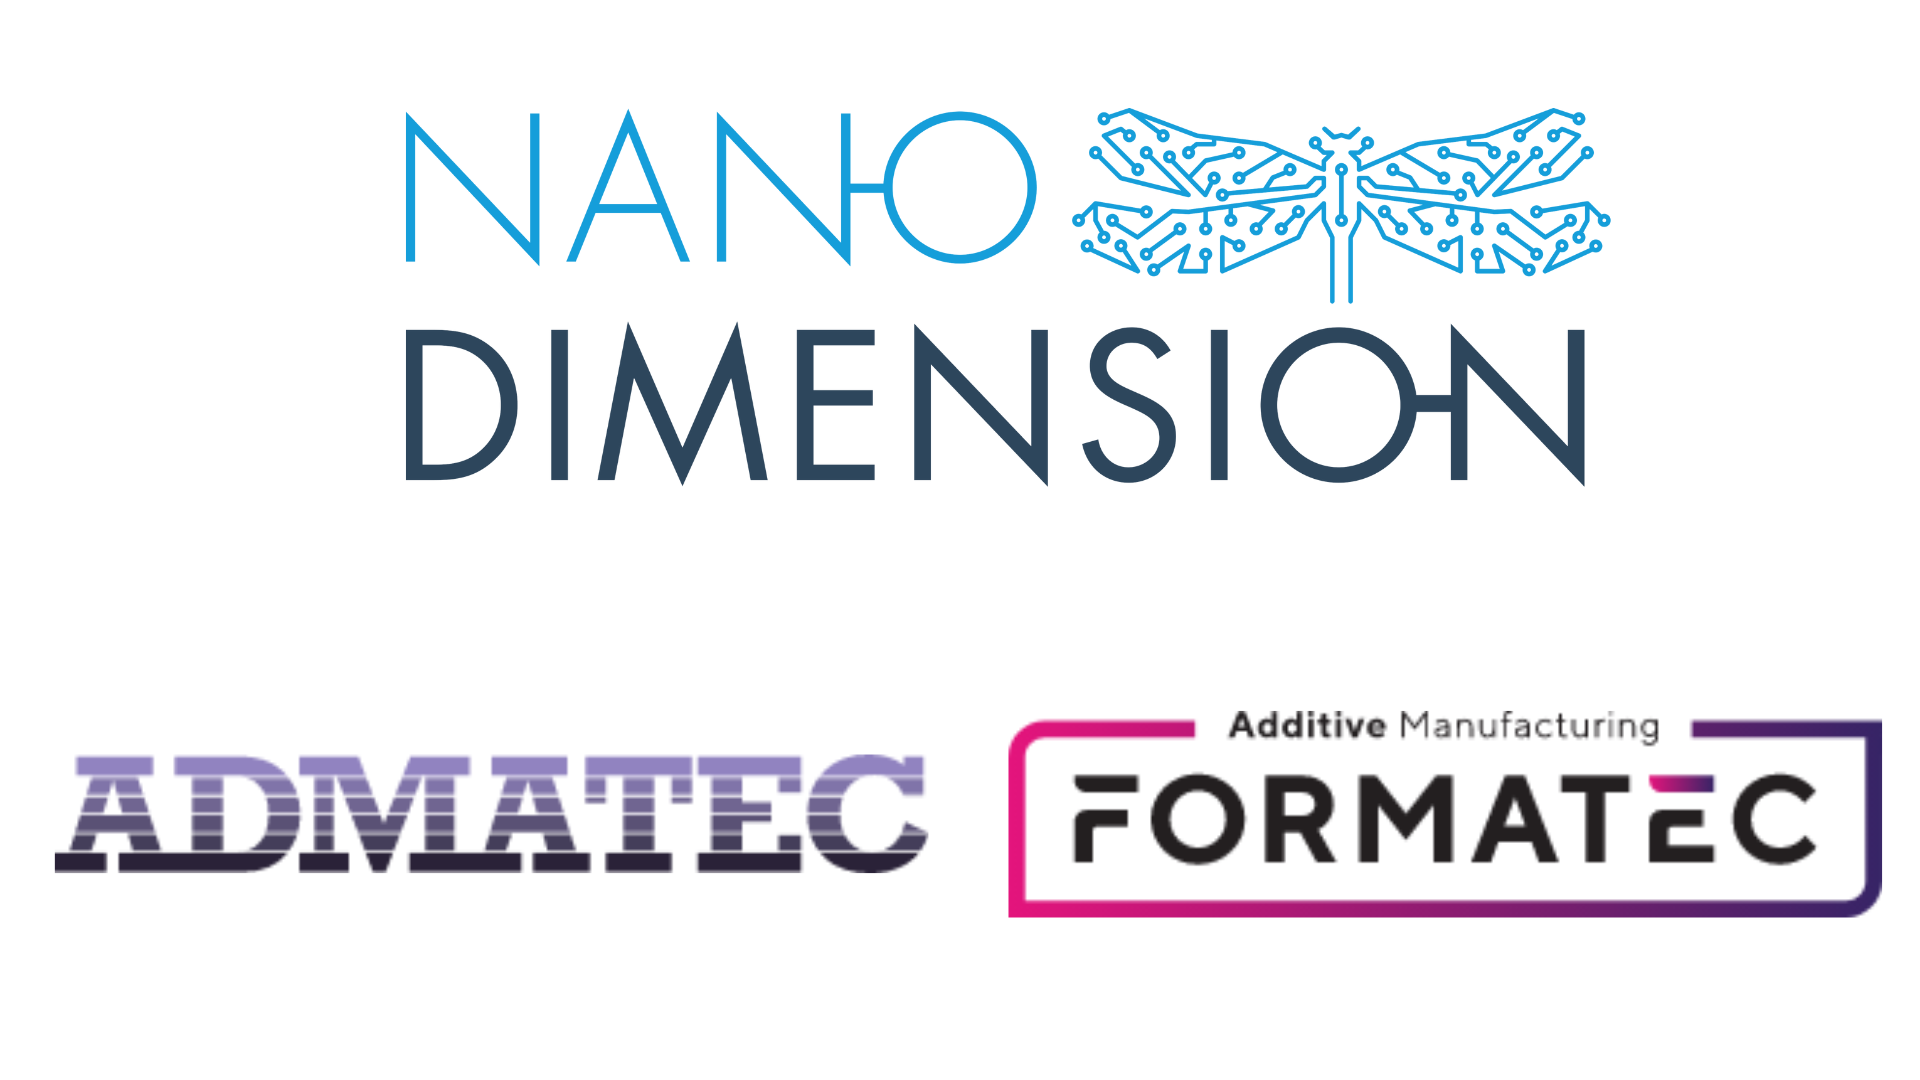 ano Dimension announced it has closed agreement to acquire Formatec Holding B.V.,to create a metal and ceramic additive manufacturing portofolio.